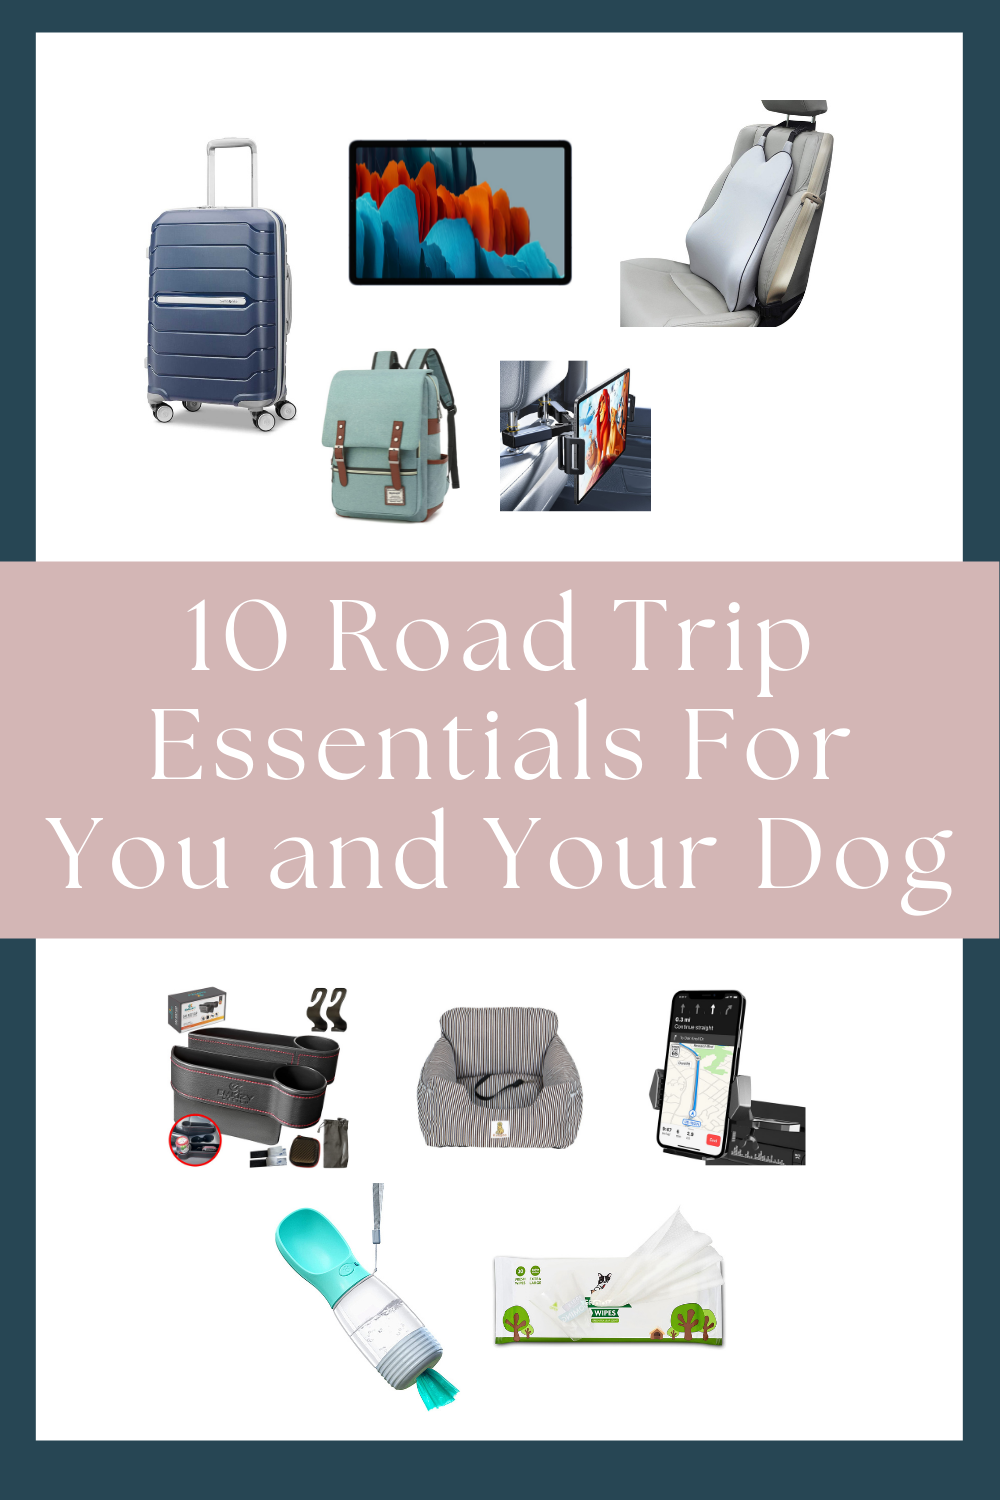 Road trip essentials you need to pack